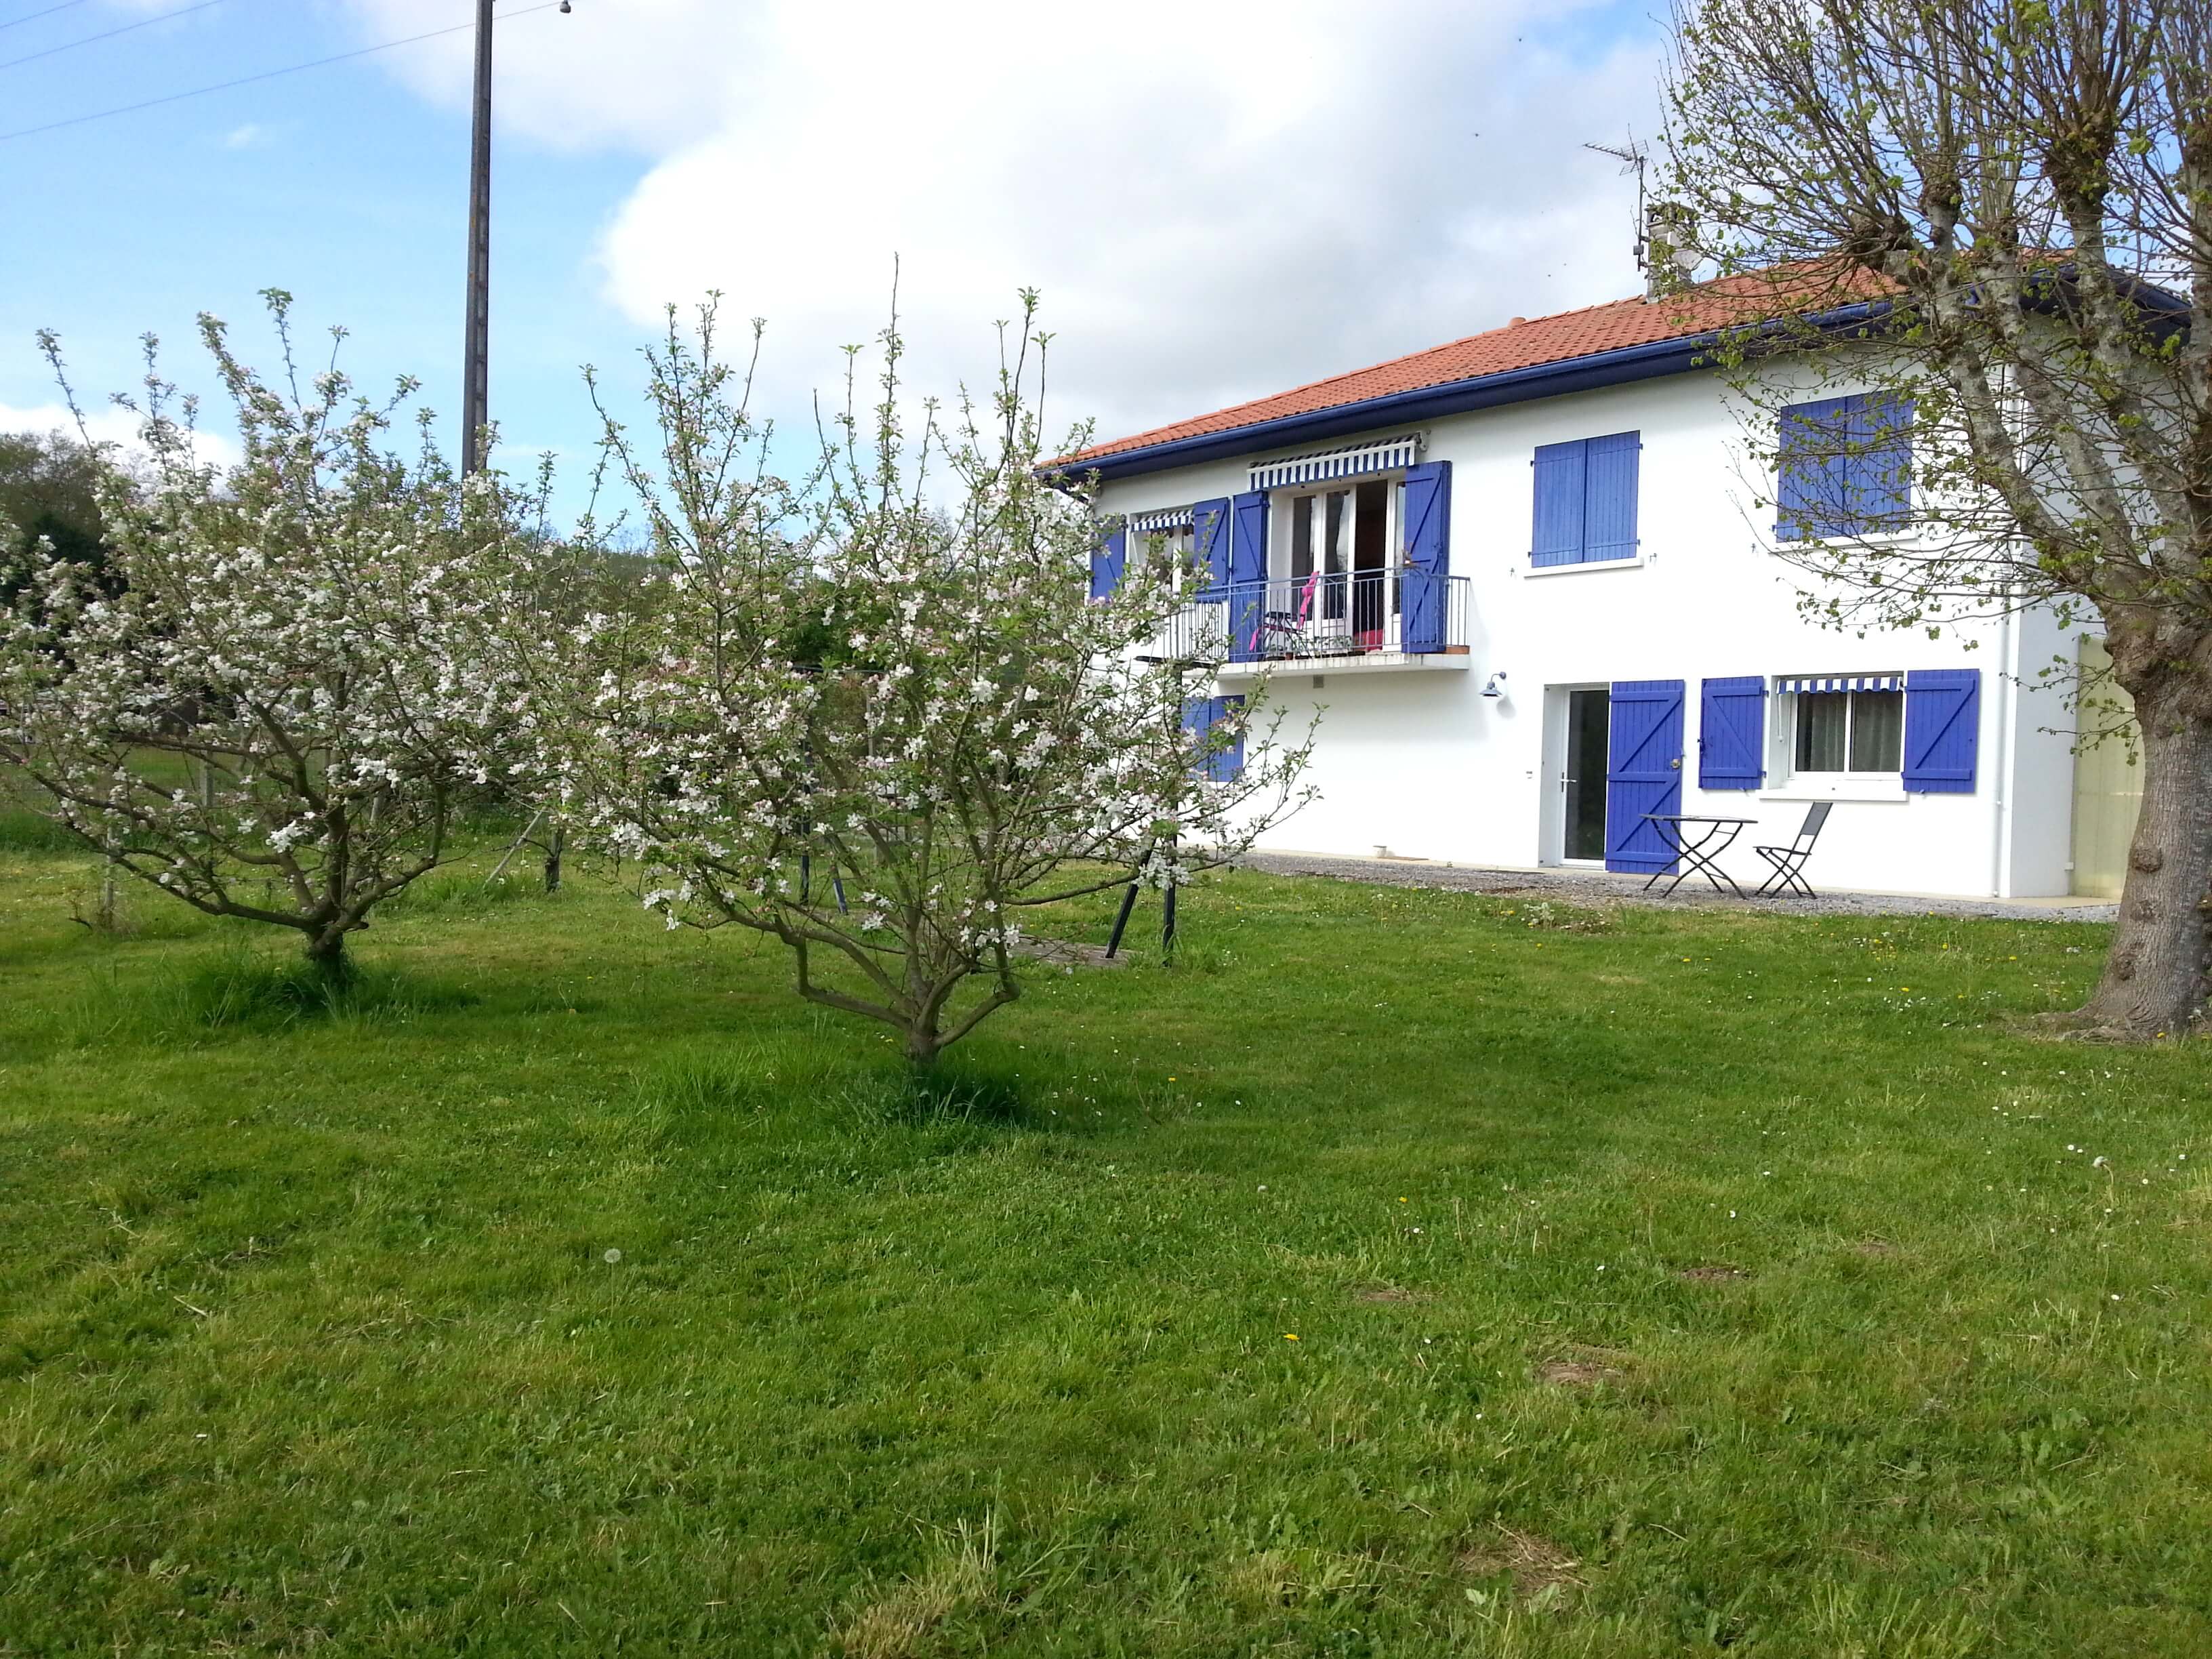 the white and blue house seen from the orchard